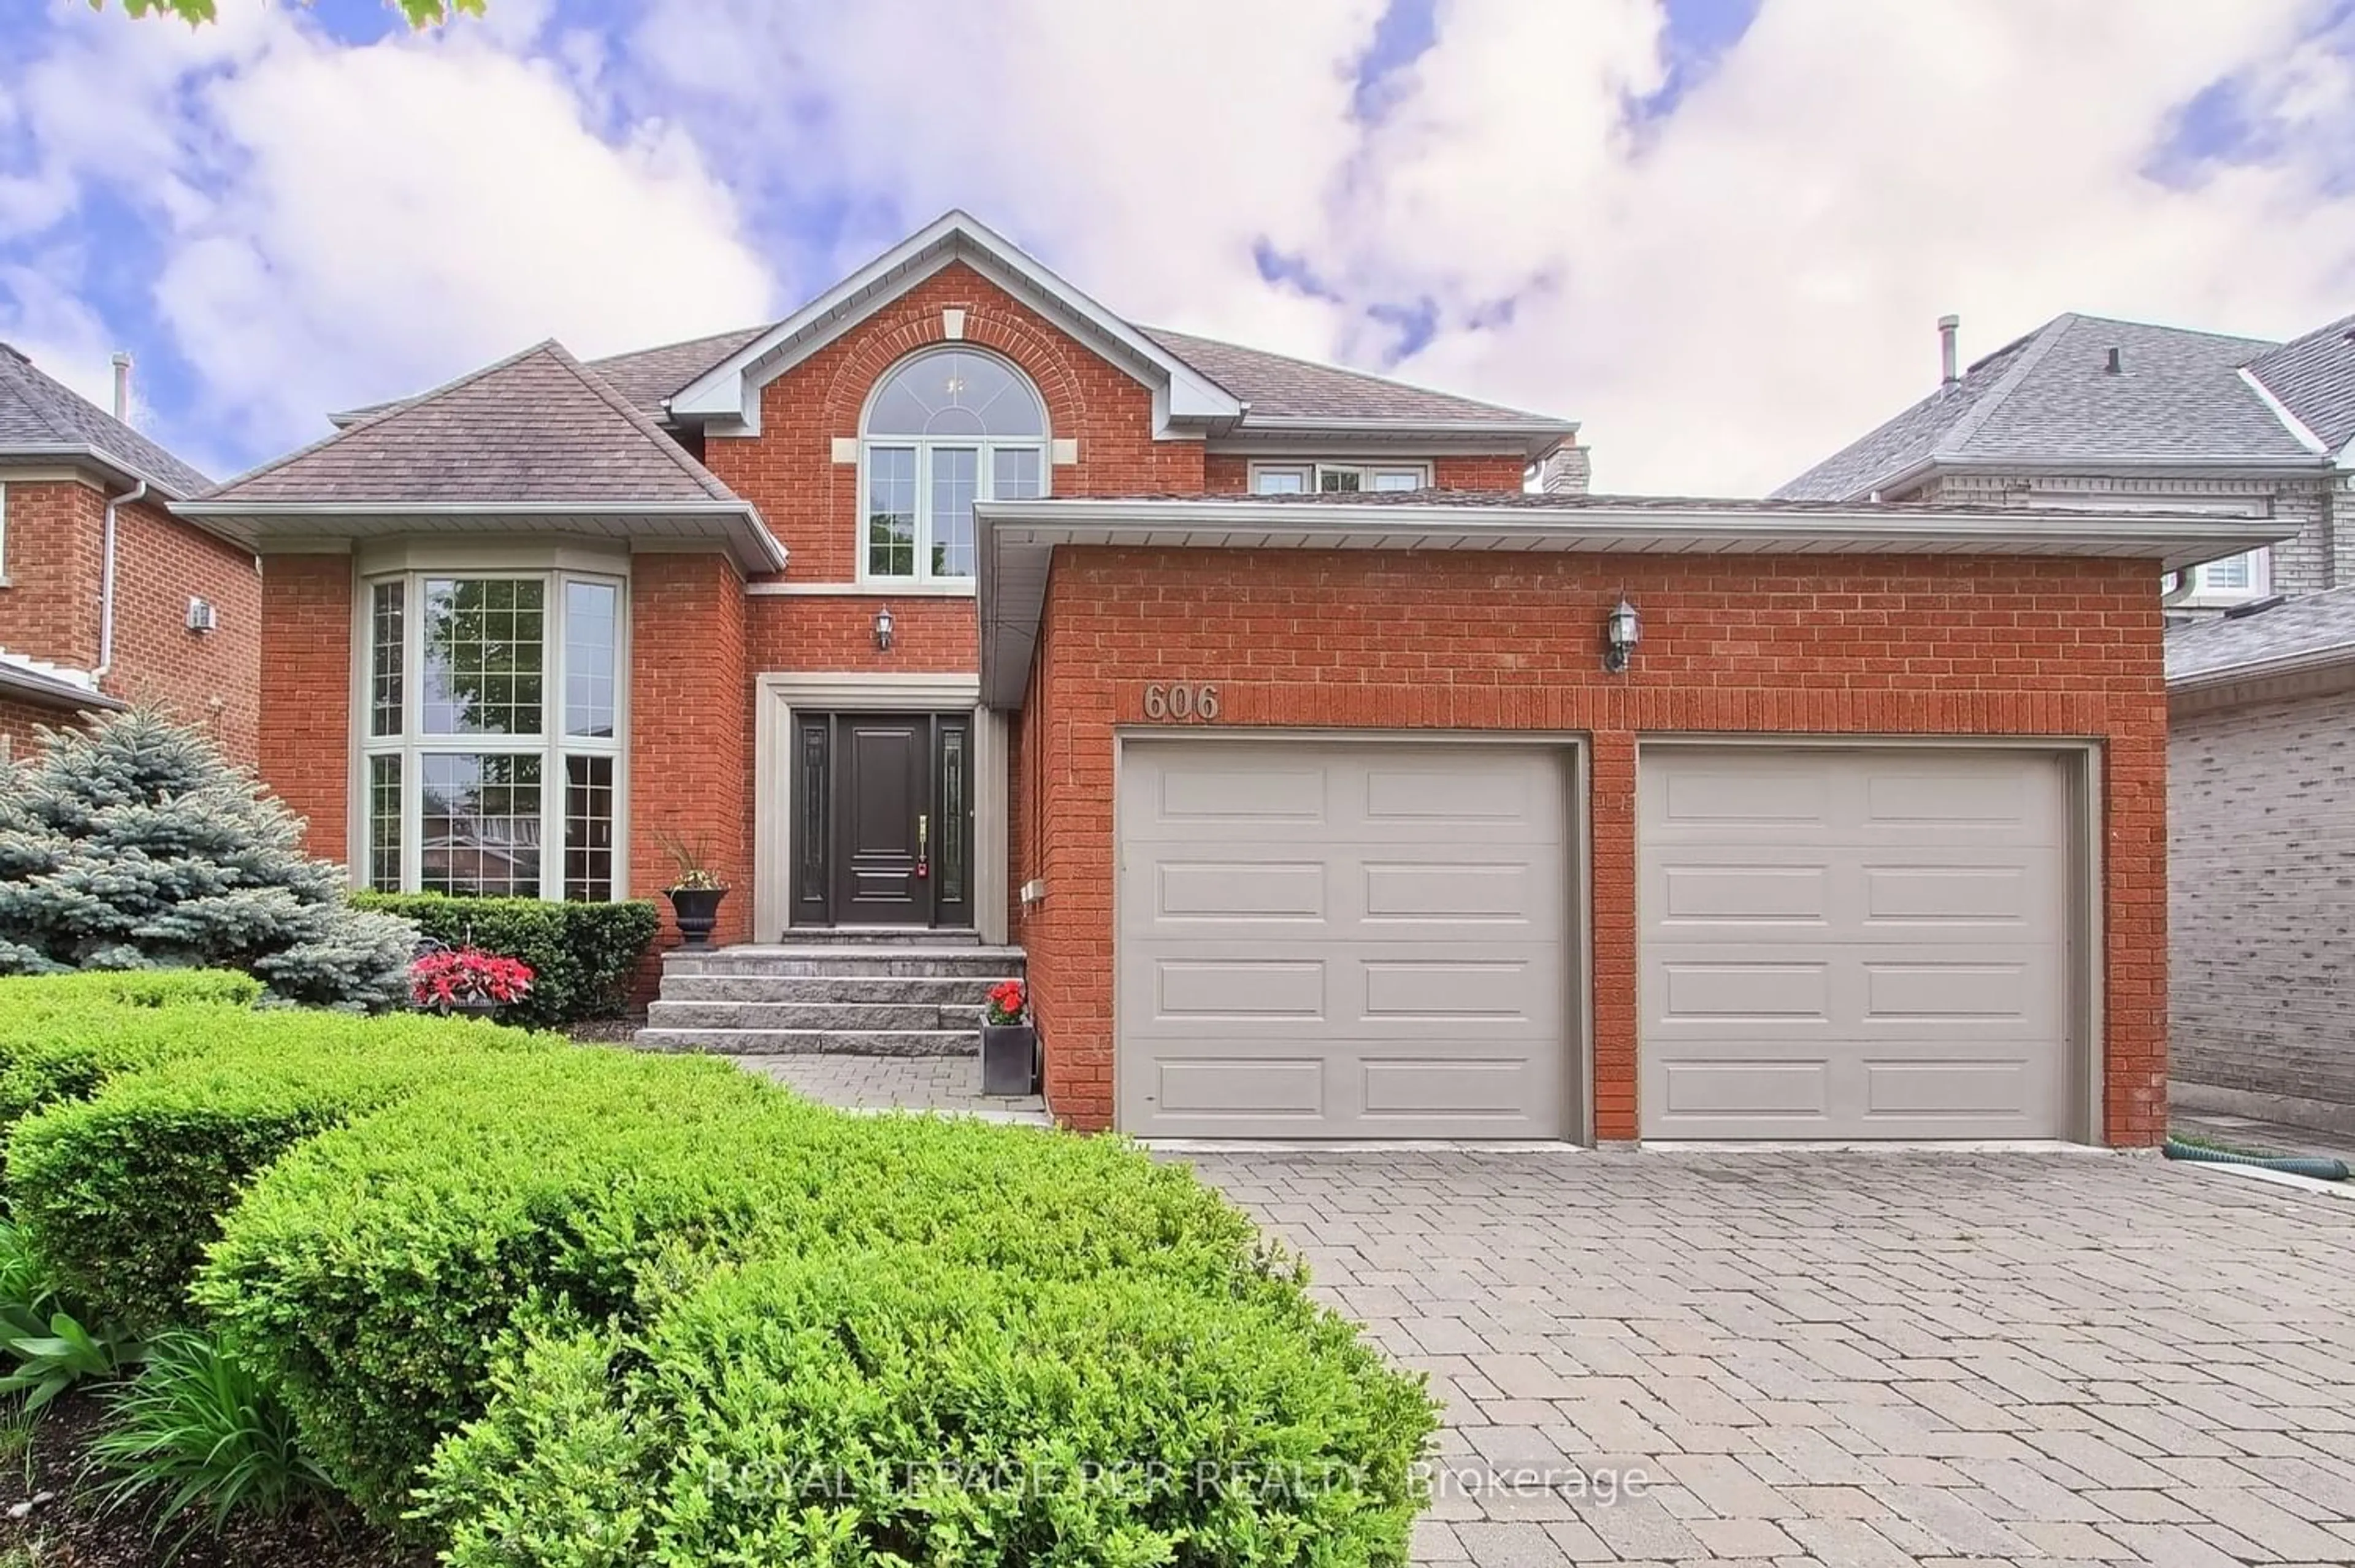 Home with brick exterior material for 606 Brooker Rdge, Newmarket Ontario L3X 1V7